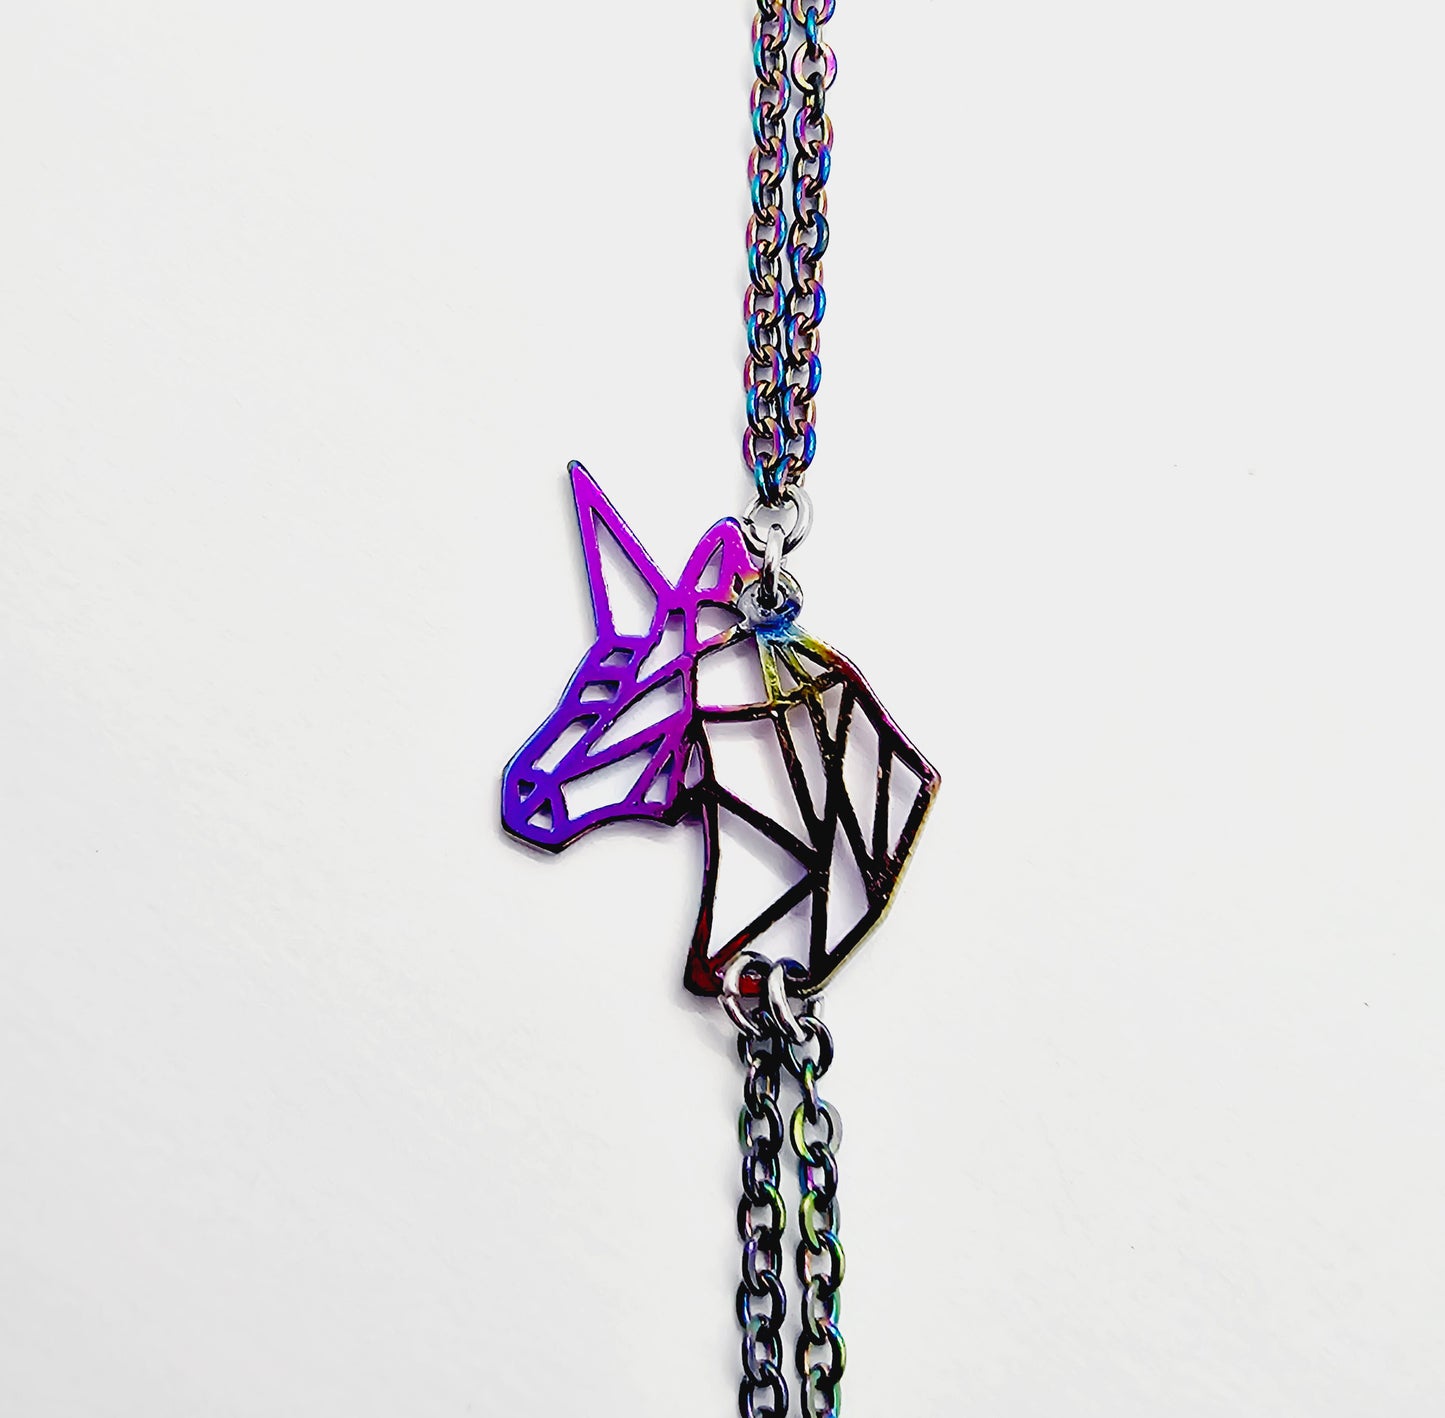 Unicorn Necklace to Nipple, Rainbow with Stainless Steel Chains and Nipple Nooses, BDSM Nipple Clamps, or wear with Piercings.